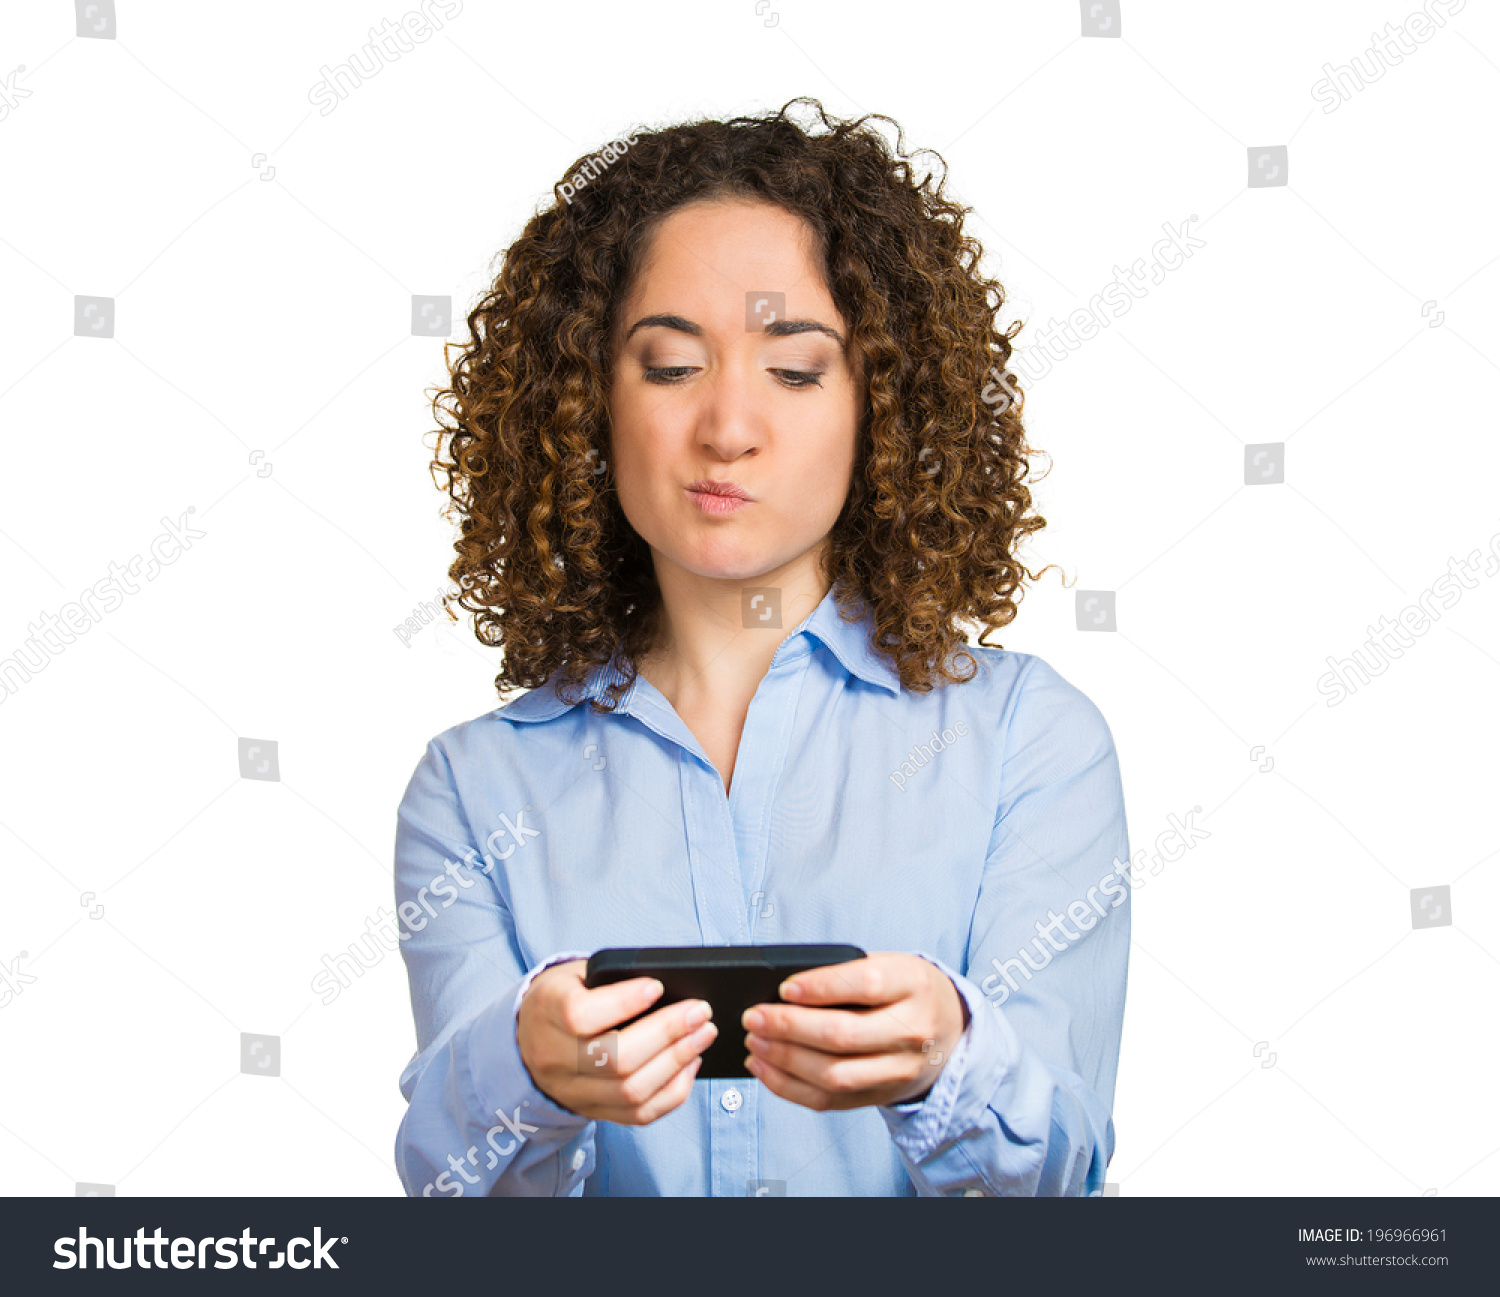 Closeup Portrait Young Angry Woman Unhappy Annoyed By Something Someone On Her Cell Phone 8178